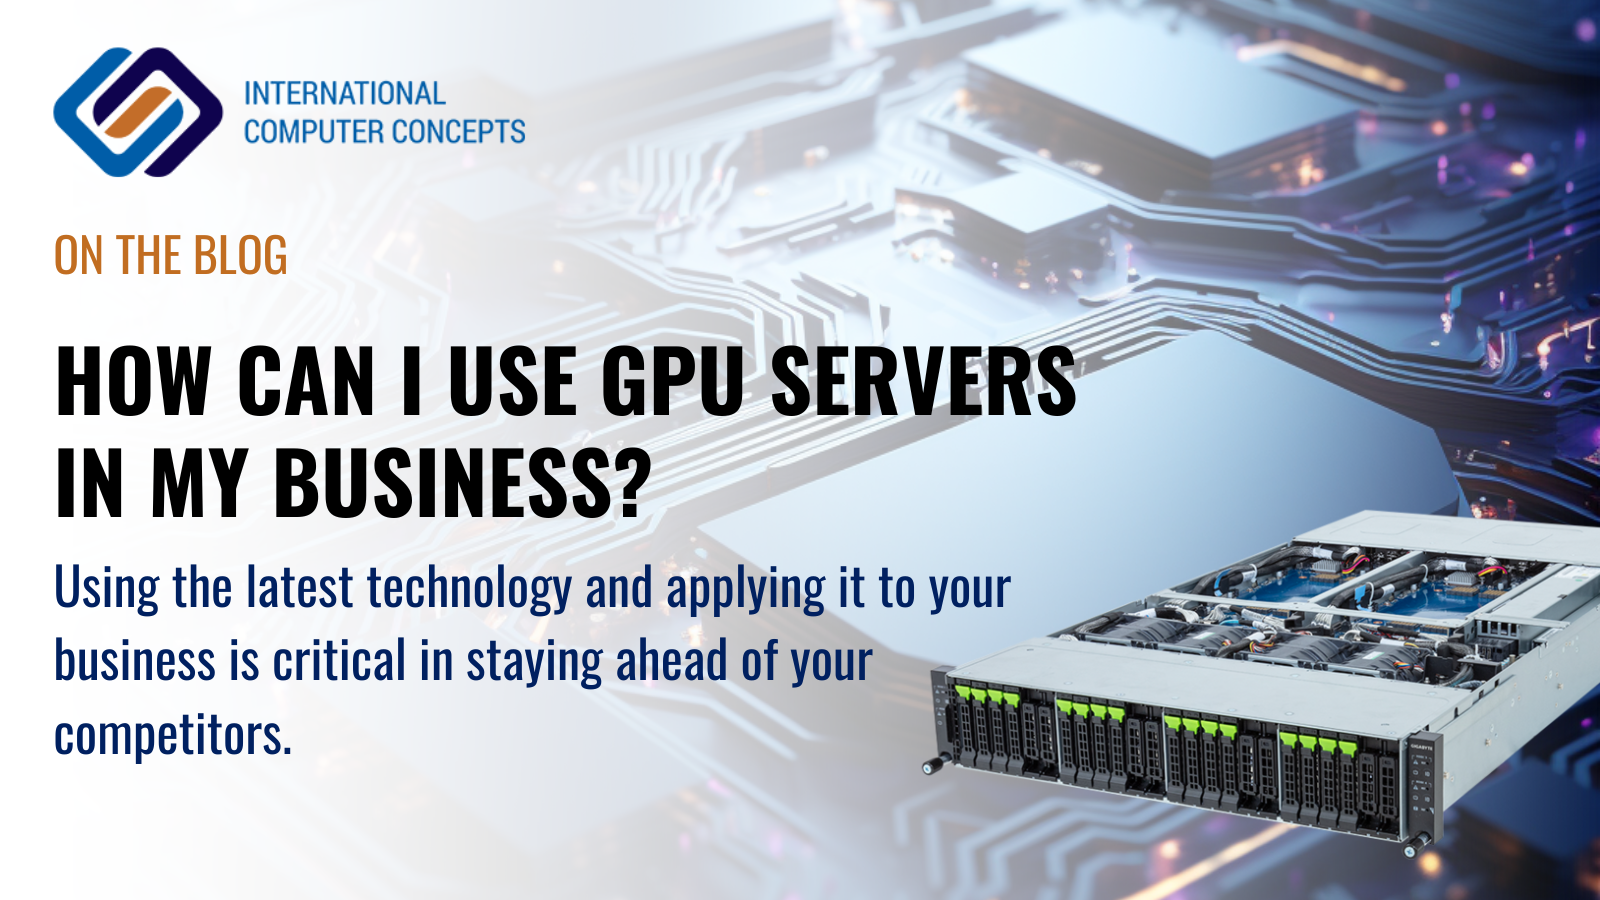 How can I use GPU servers in my business?